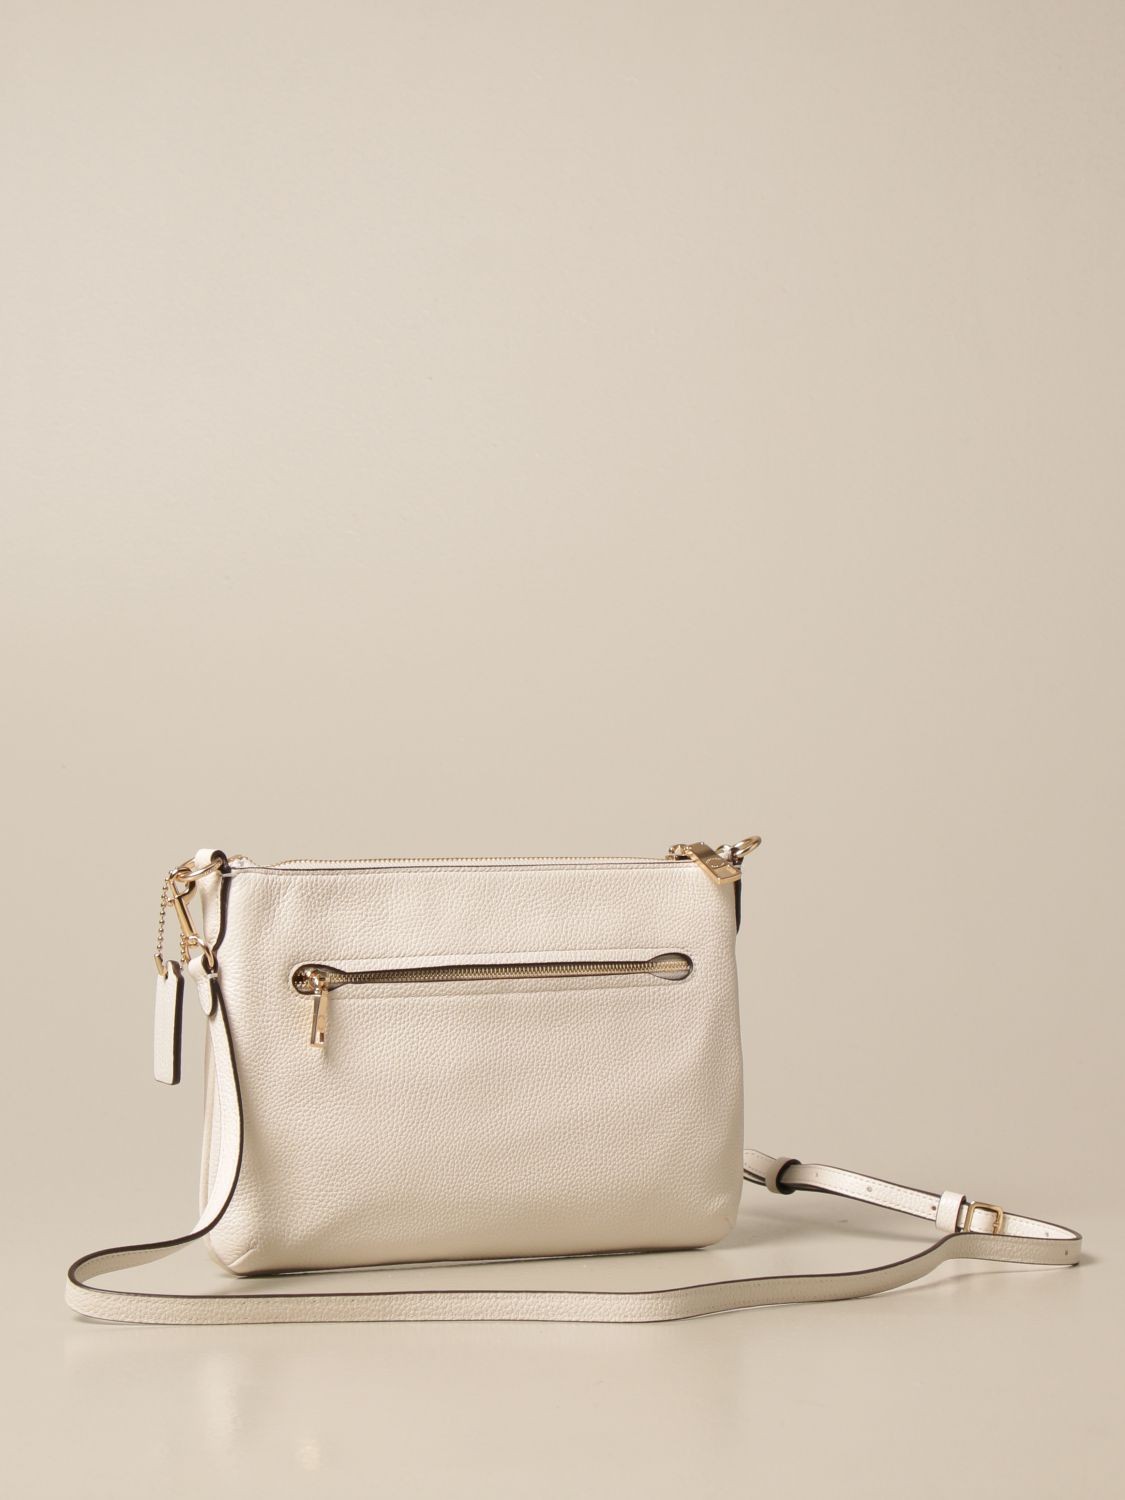 COACH: Polly shoulder bag in textured leather | Crossbody Bags Coach ...